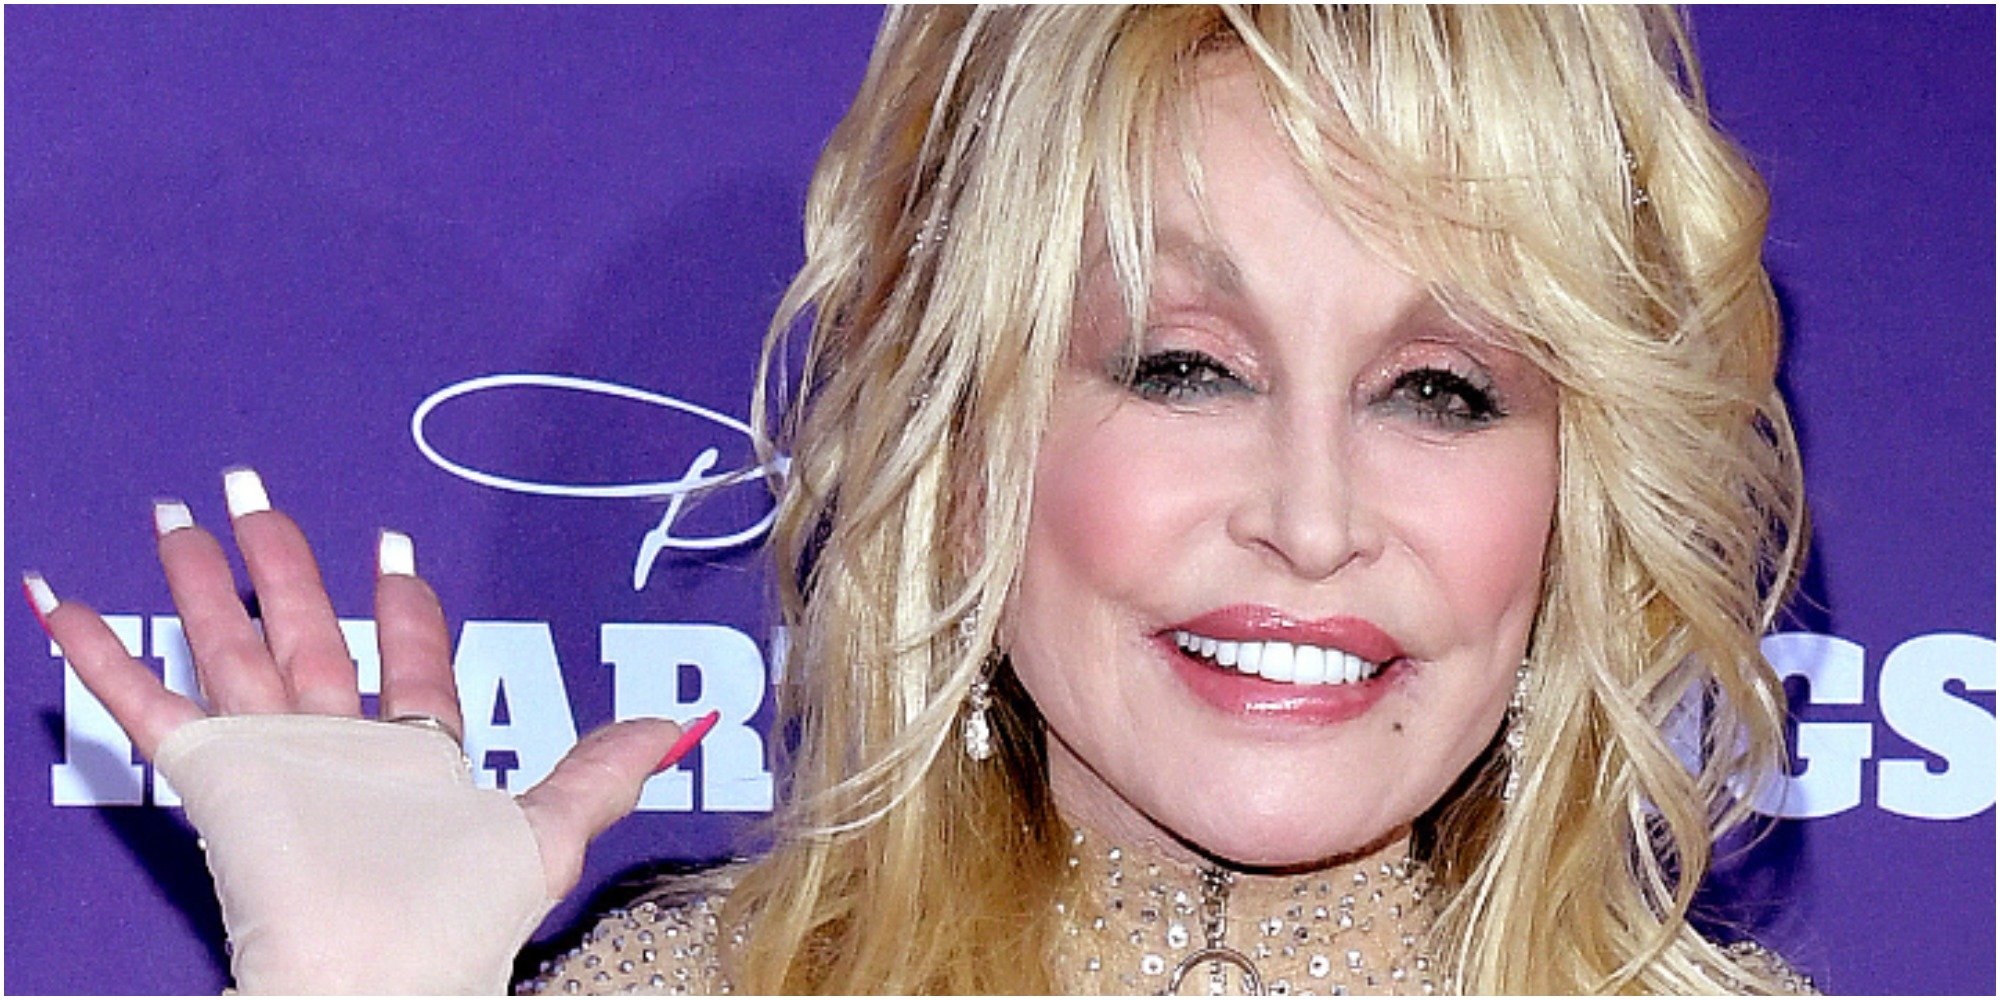 Dolly Parton waves to fans wearing a sparkly dress.